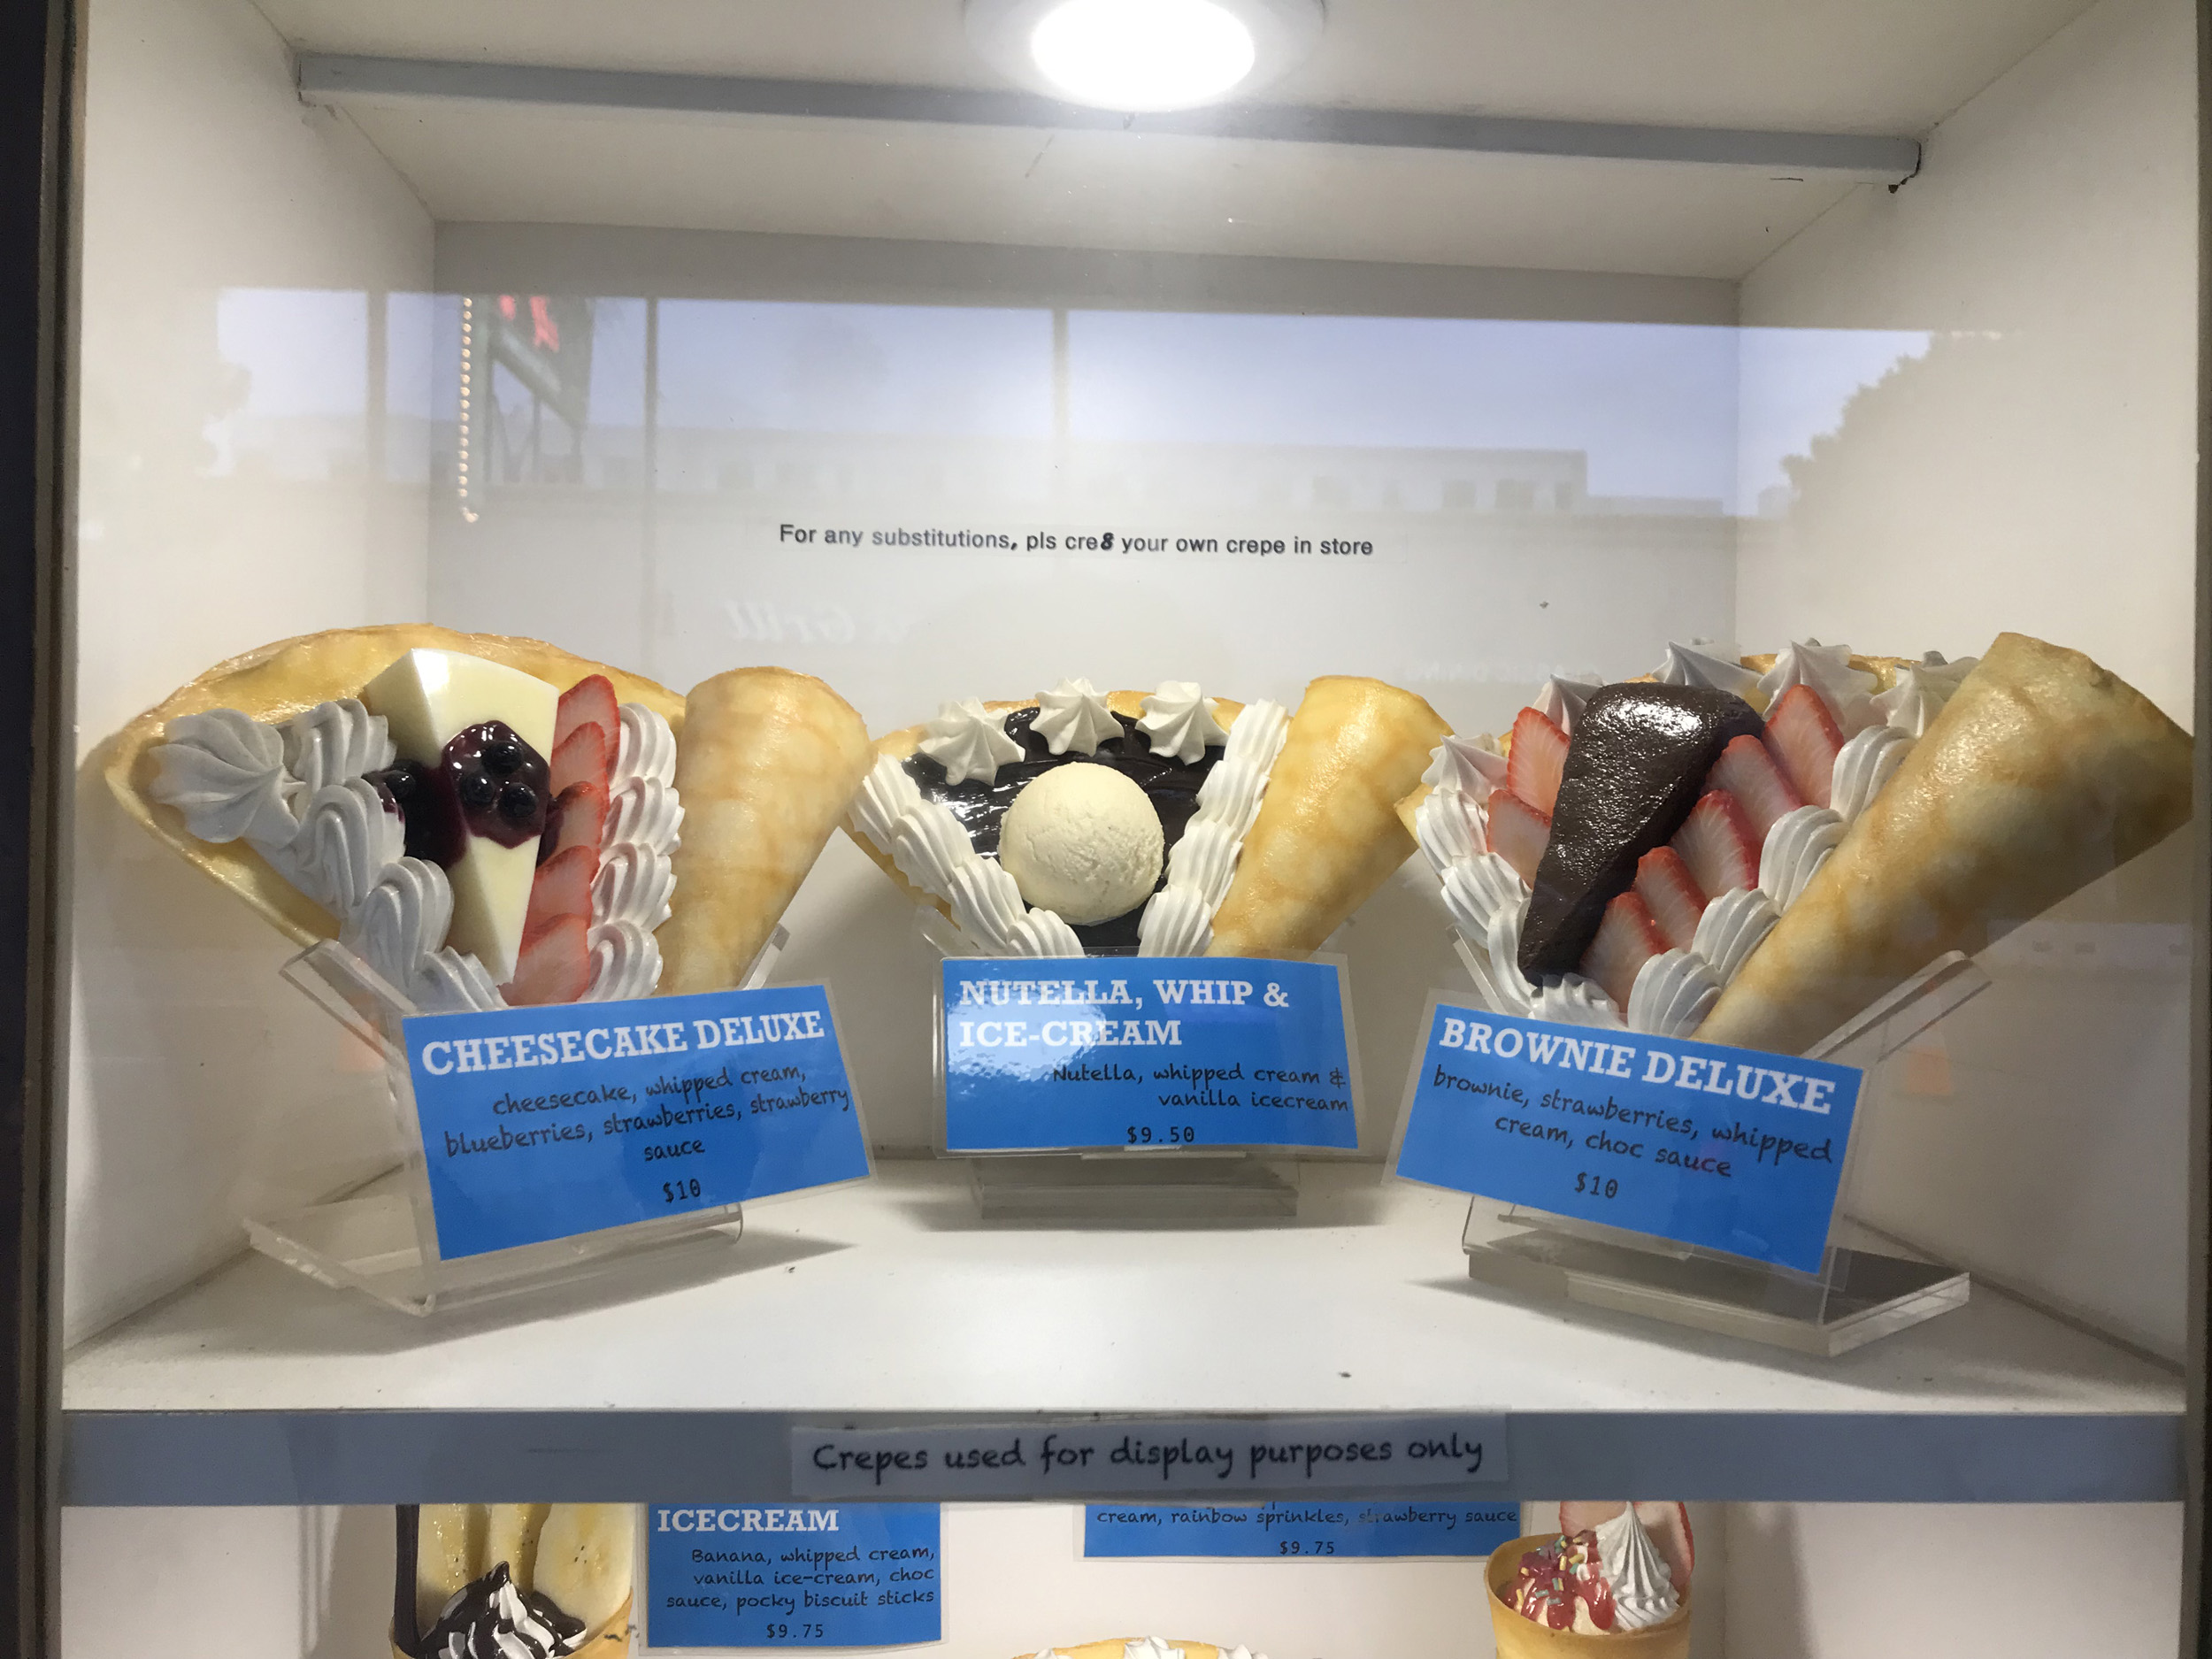 Cre8 Crepes Offers Hand-Held Custom Crêpes & Ice Cream